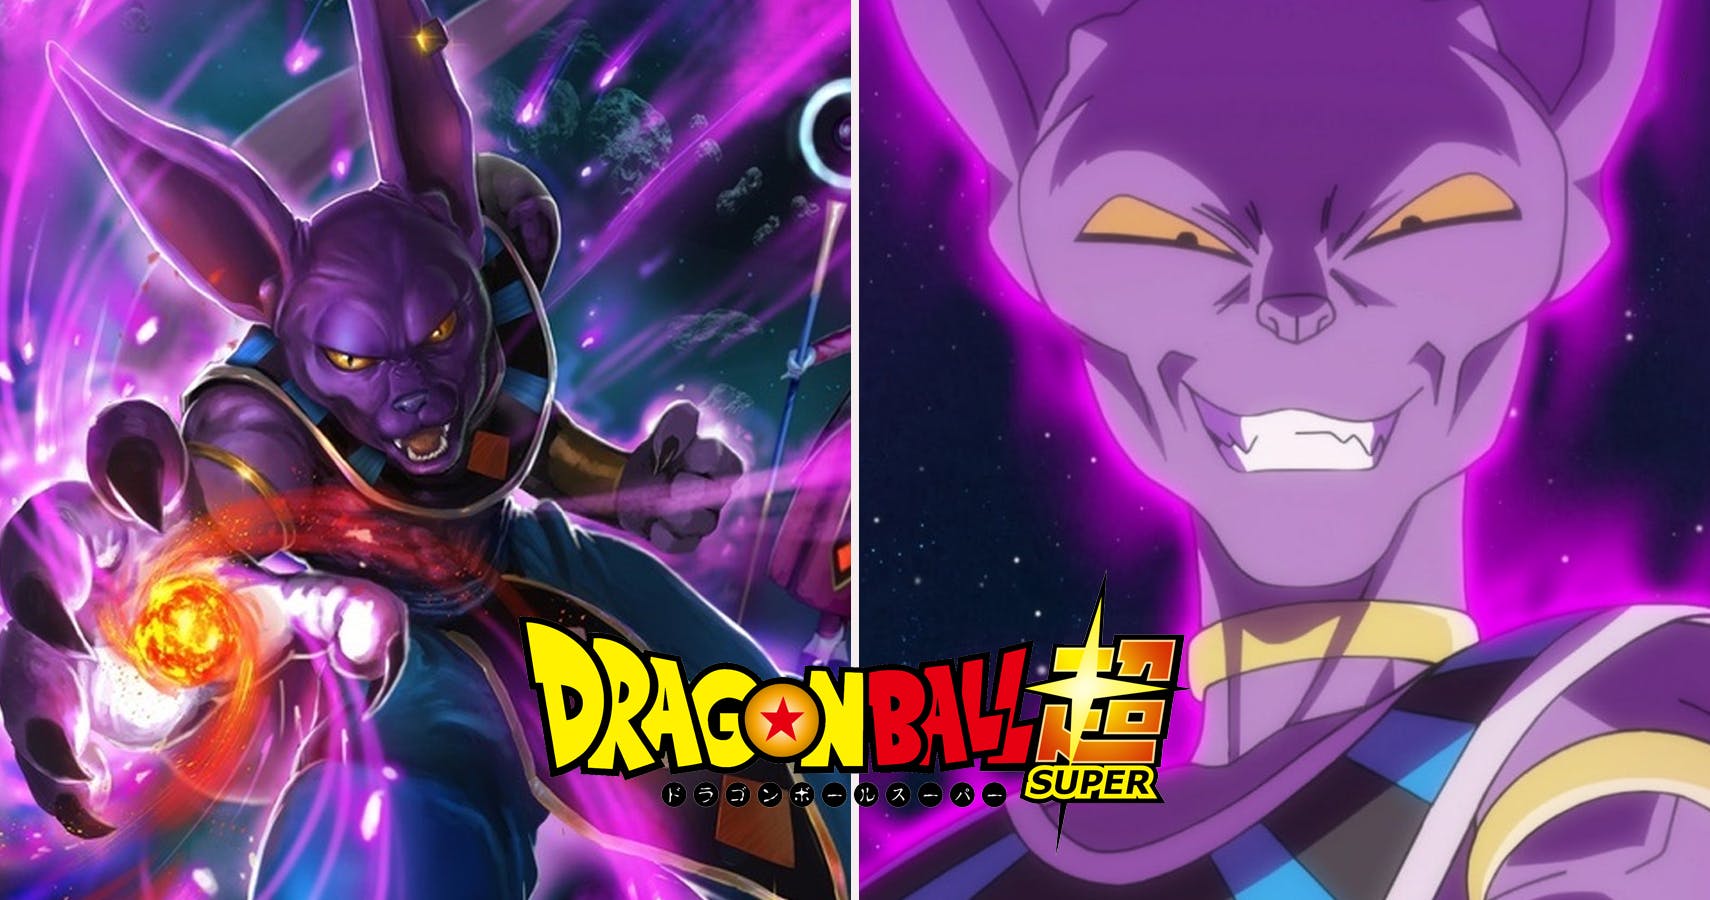 Dragon Ball Super Beerus Voice Actor Talks About Beerus' Cur